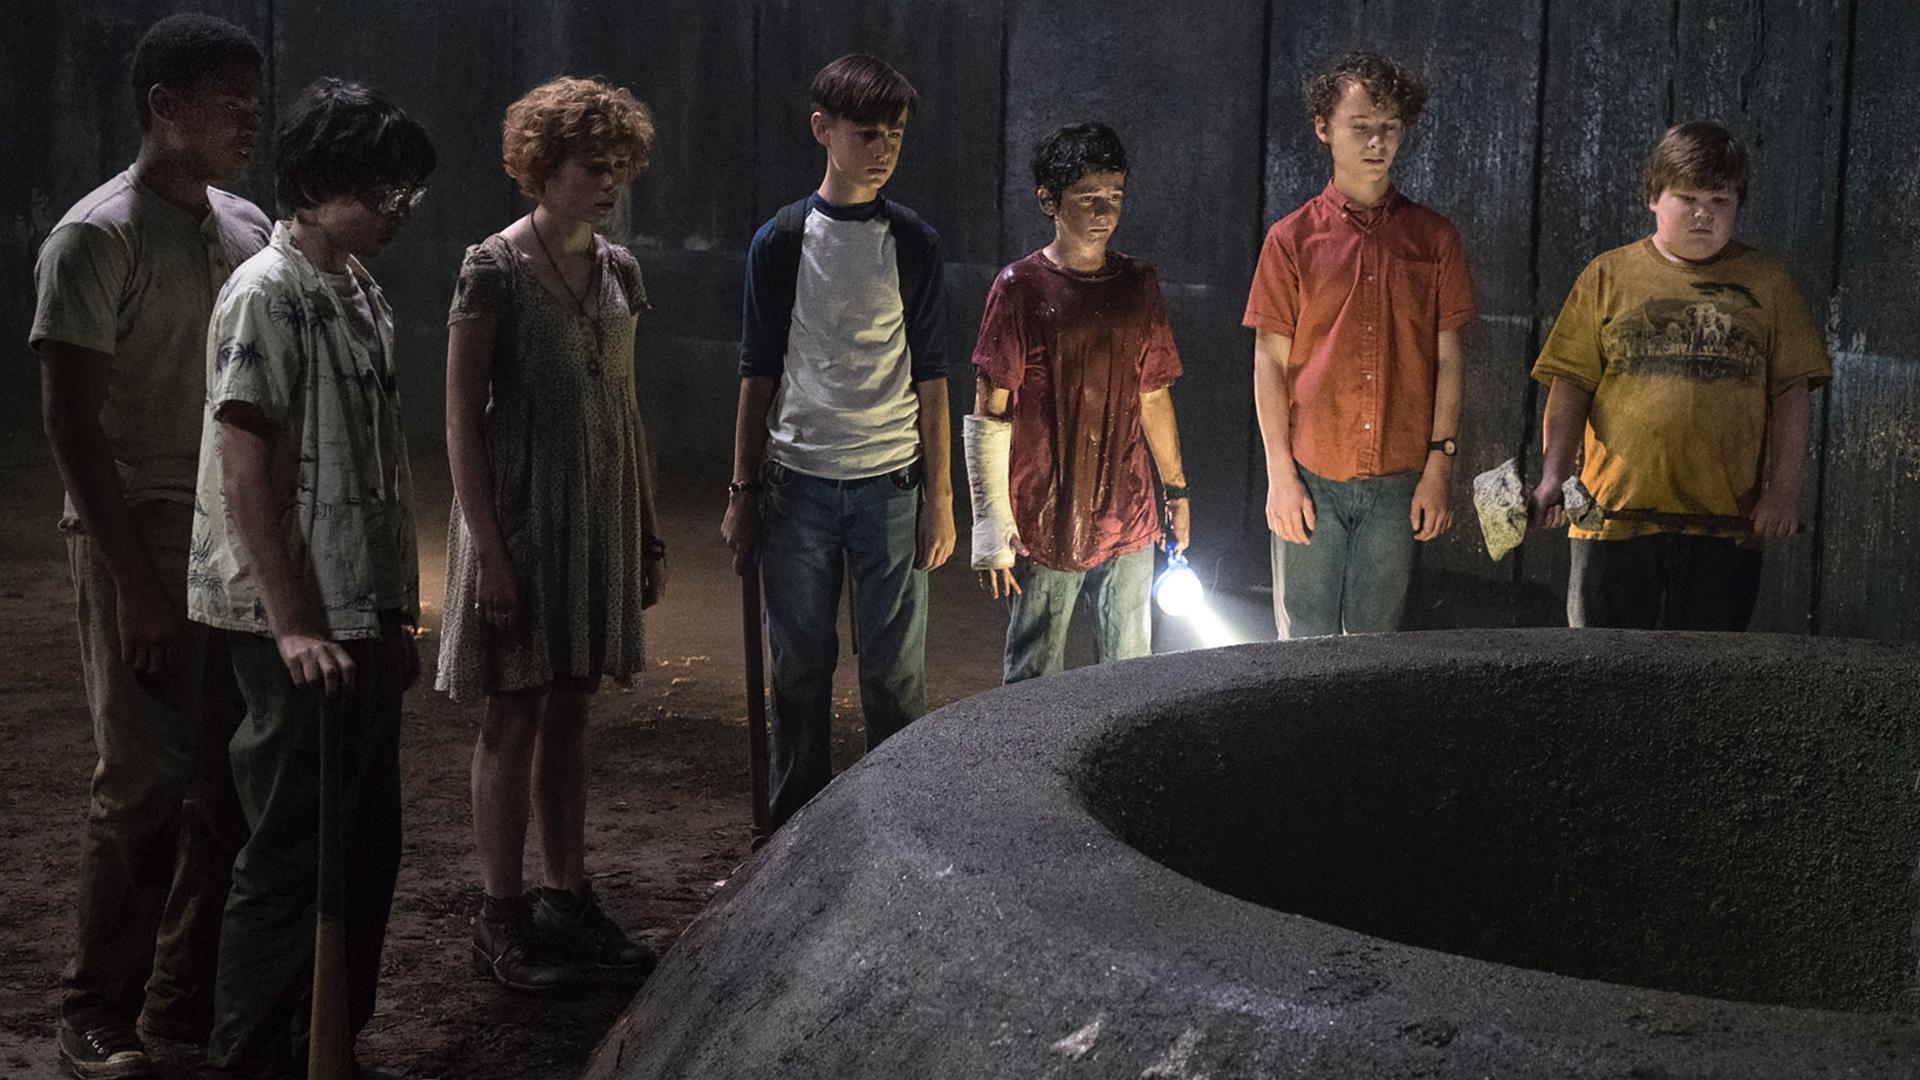 With Casting Complete, We Preview the Adult Losers' Club in 'IT